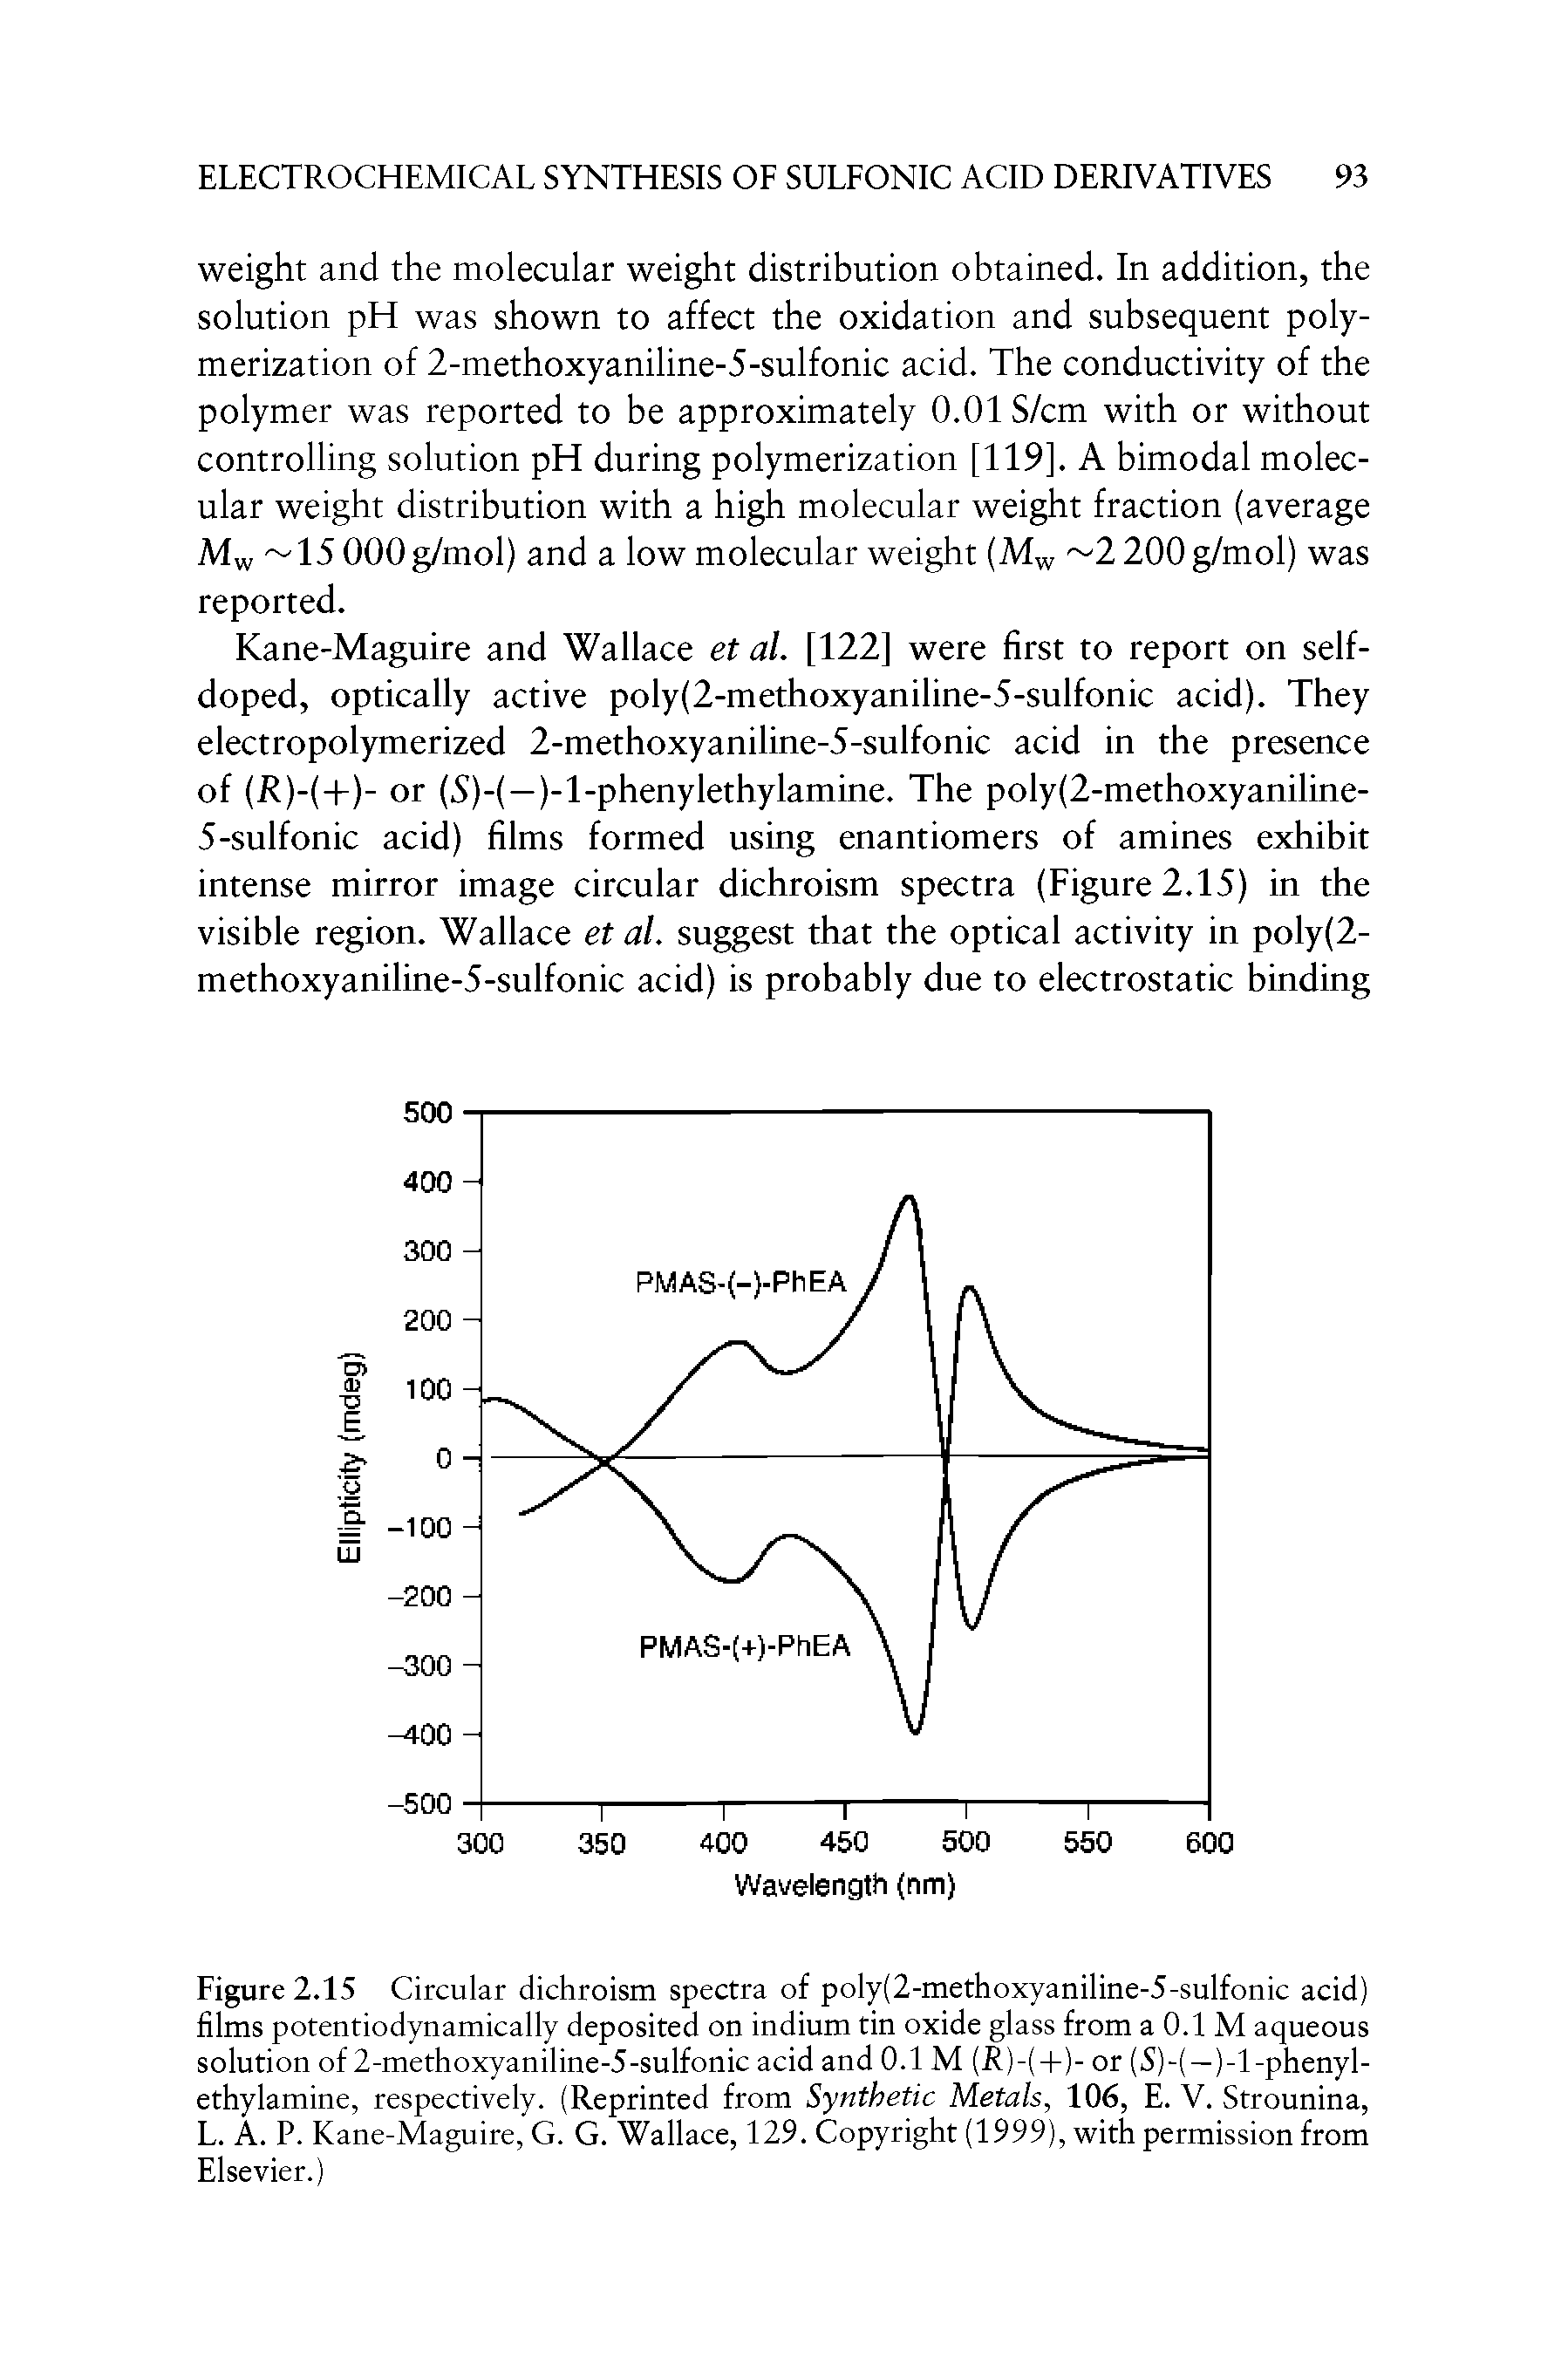 Figure 2.15 Circular dichroism spectra of poly(2-methoxyaniline-5-sulfonic acid) films potentiodynamically deposited on indium tin oxide glass from a 0.1 M aqueous solution of 2-methoxyaniline-5-sulfonic acid and 0.1 M R)- +)- or (5)-(—)-Tphenyl-ethylamine, respectively. (Reprinted from Synthetic Metals, 106, E. V. Strounina, L. A. P. Kane-Maguire, G. G. Wallace, 129. Copyright (1999), with permission from Elsevier.)...